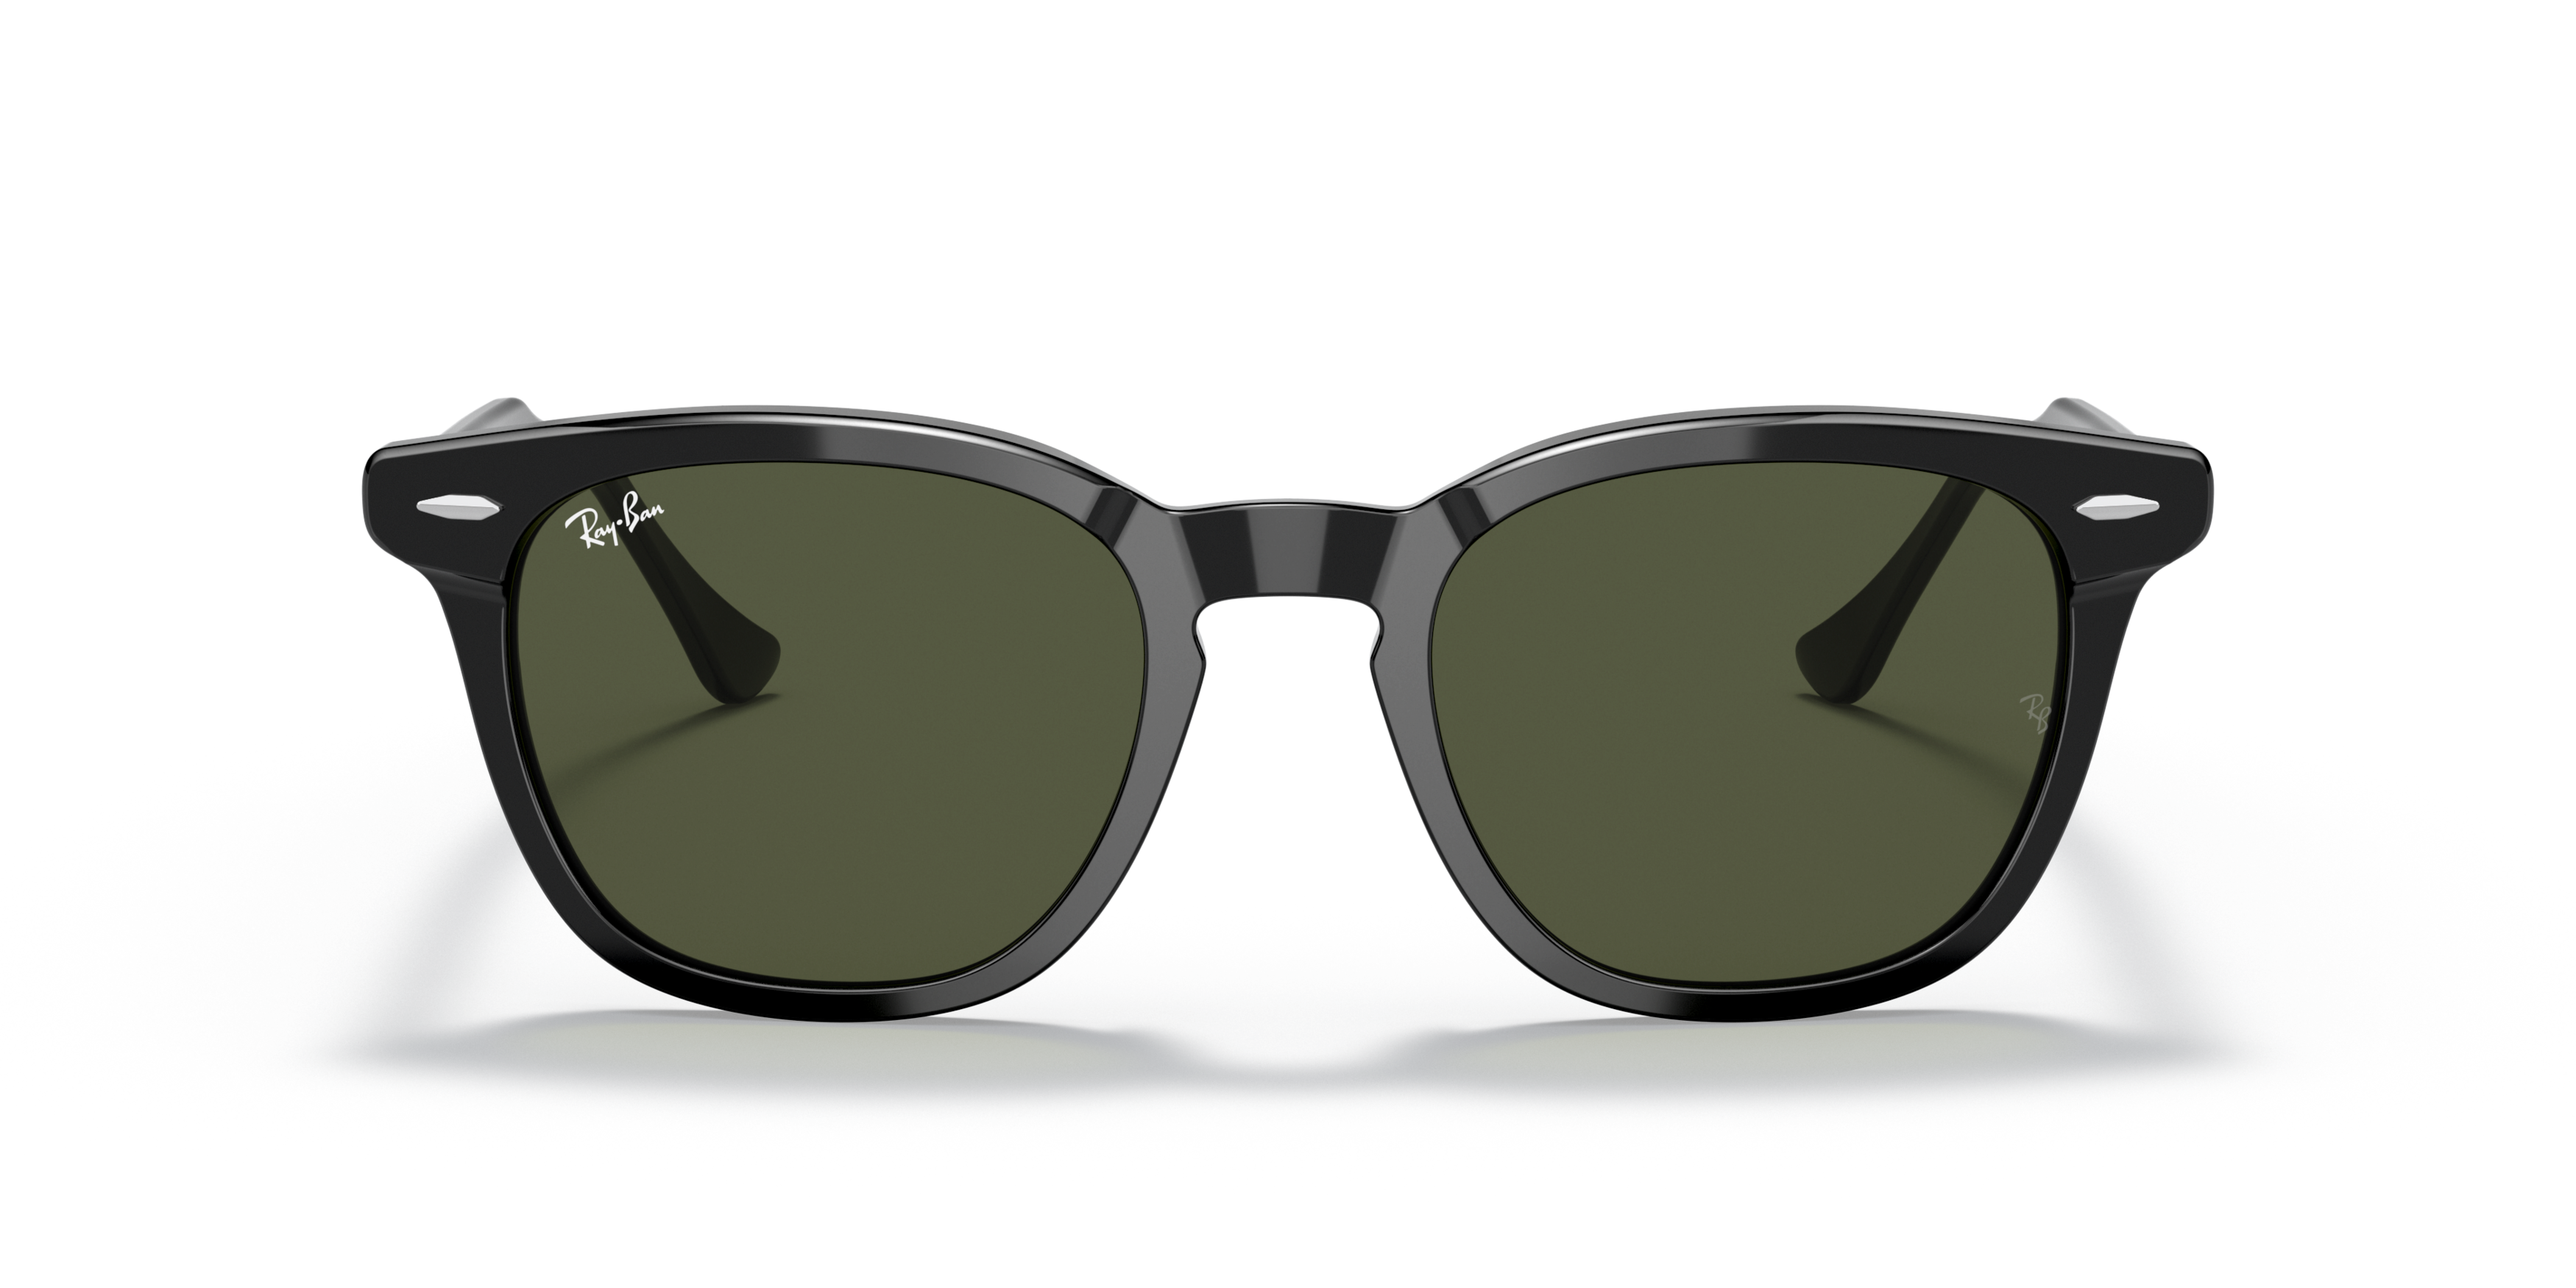 [products.image.front] Ray-Ban Hawkeye RB2298 901/31